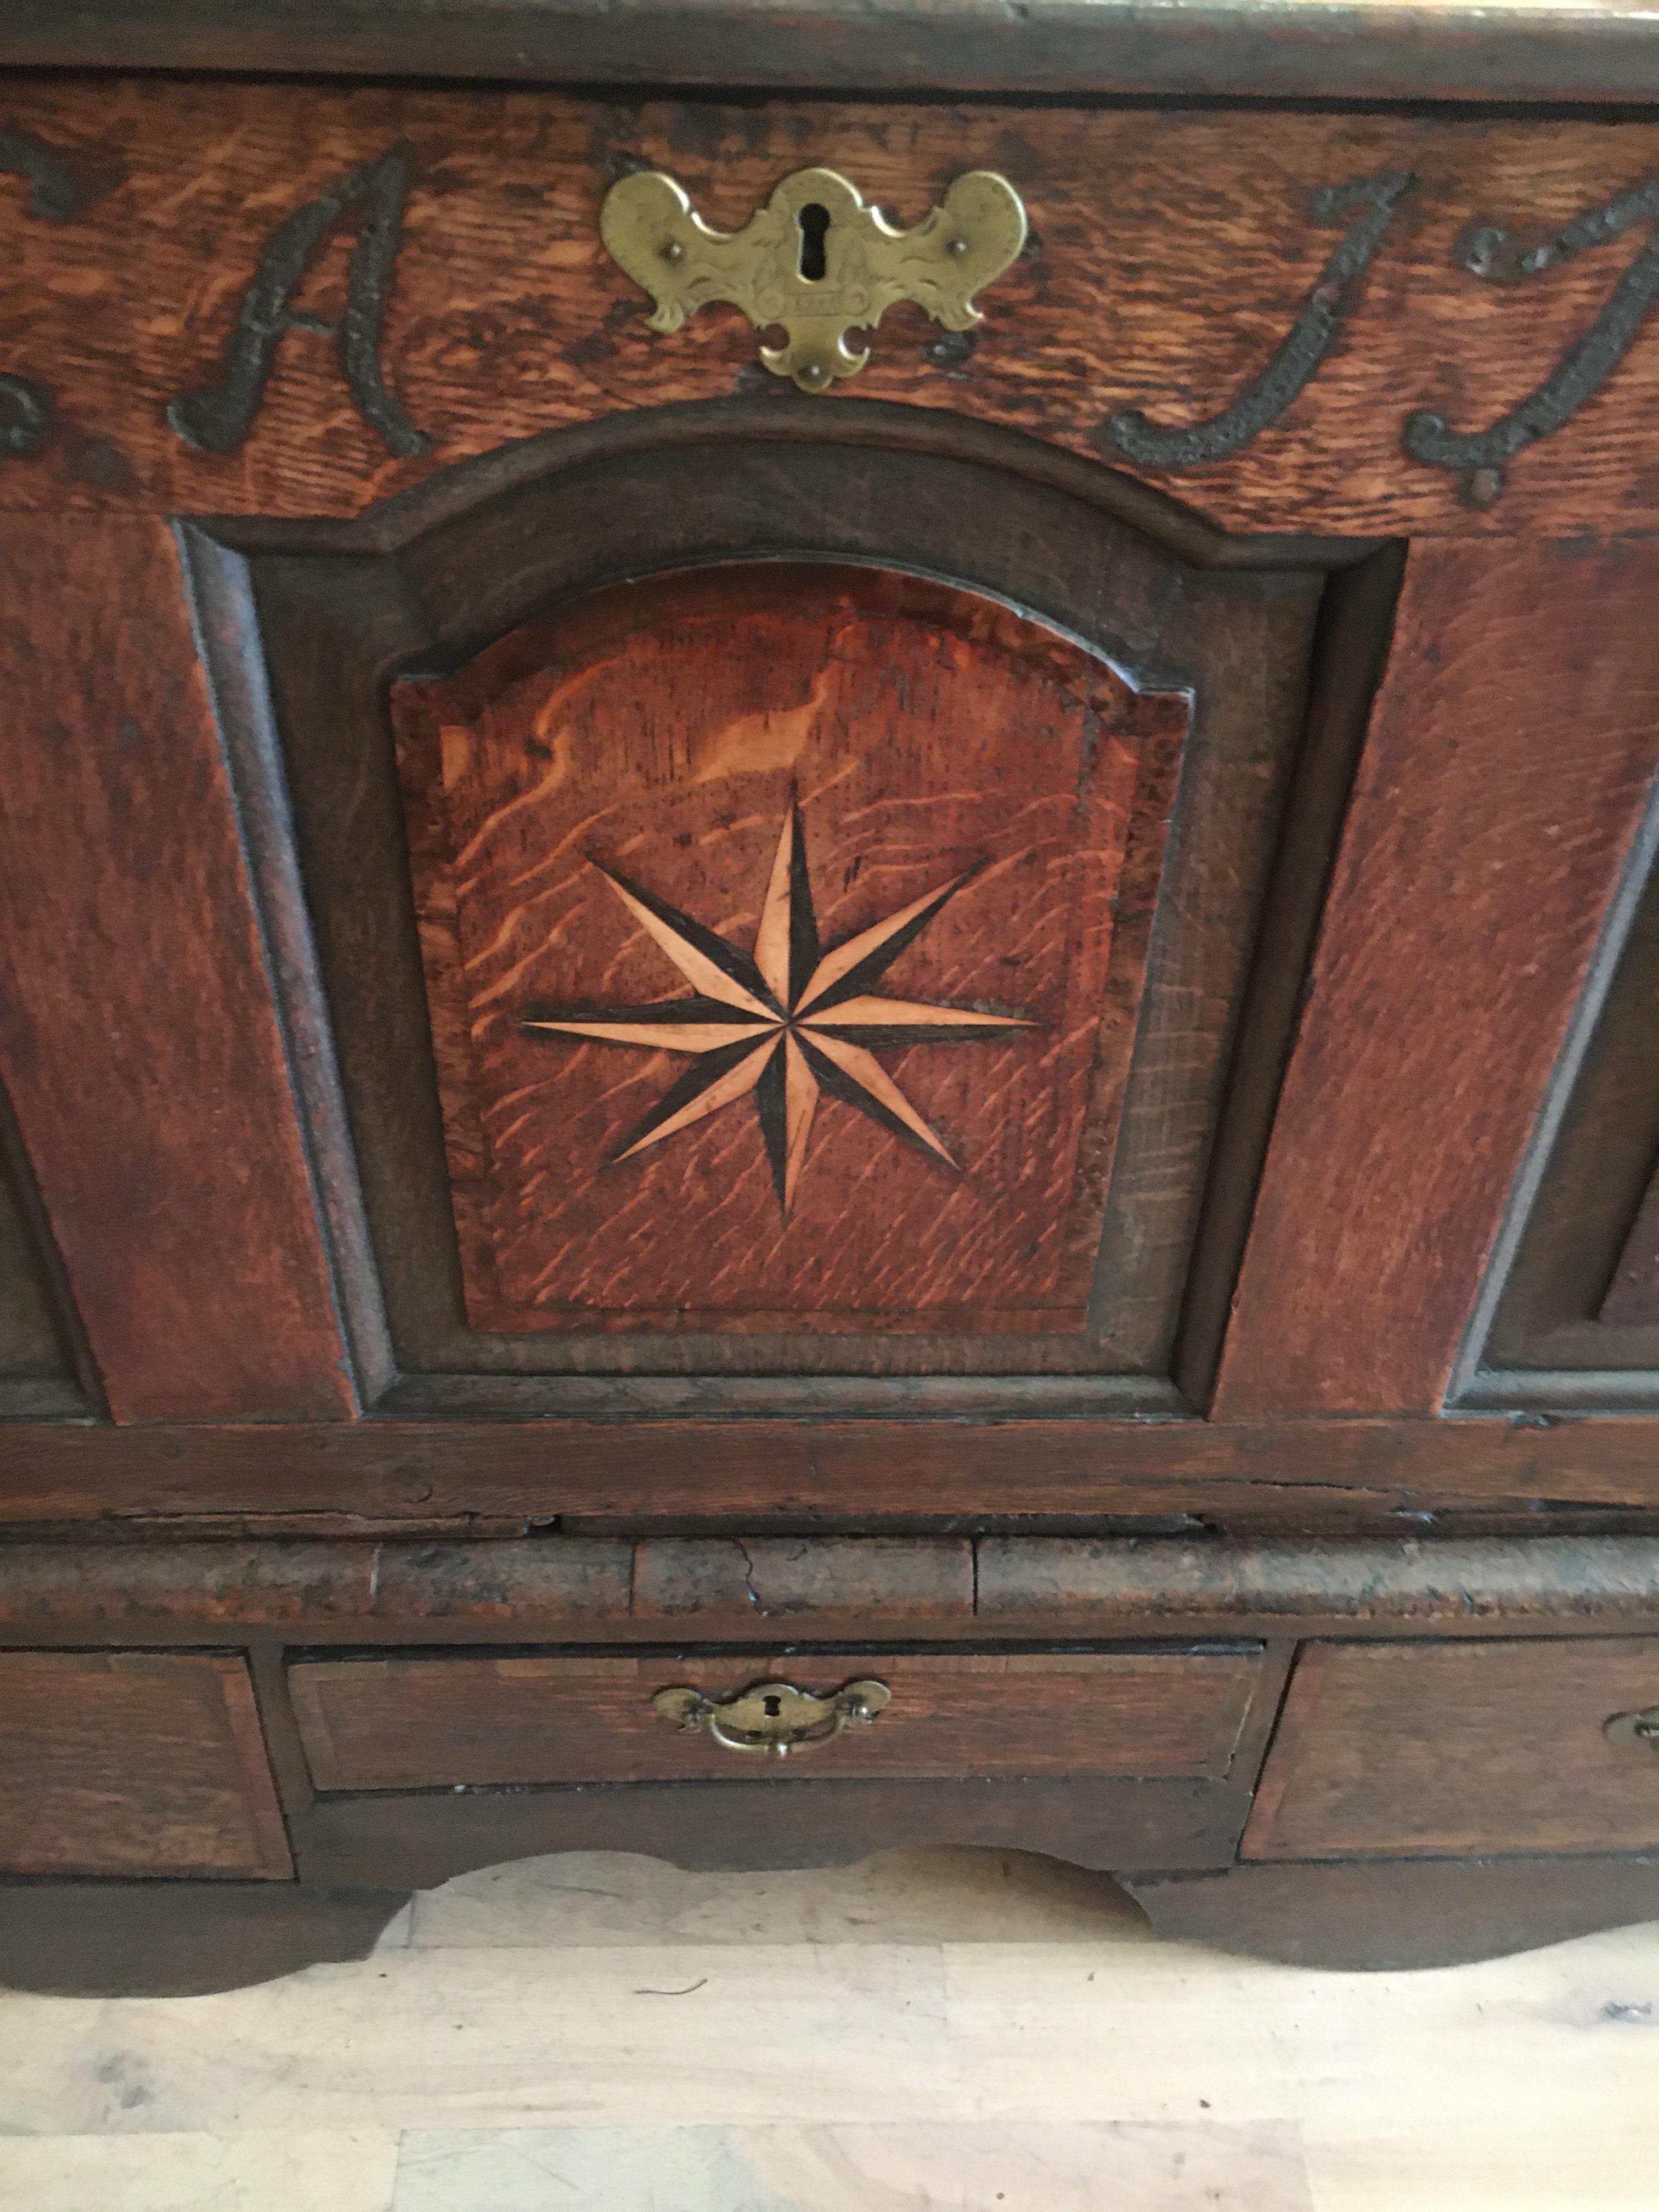 Handsome 18th century English oak chest with star inlay, dated 1730. Great patina and color, lift top over three drawers. This is a spectacular piece with great inlay and detail. It has been gone over so is ready for installation.